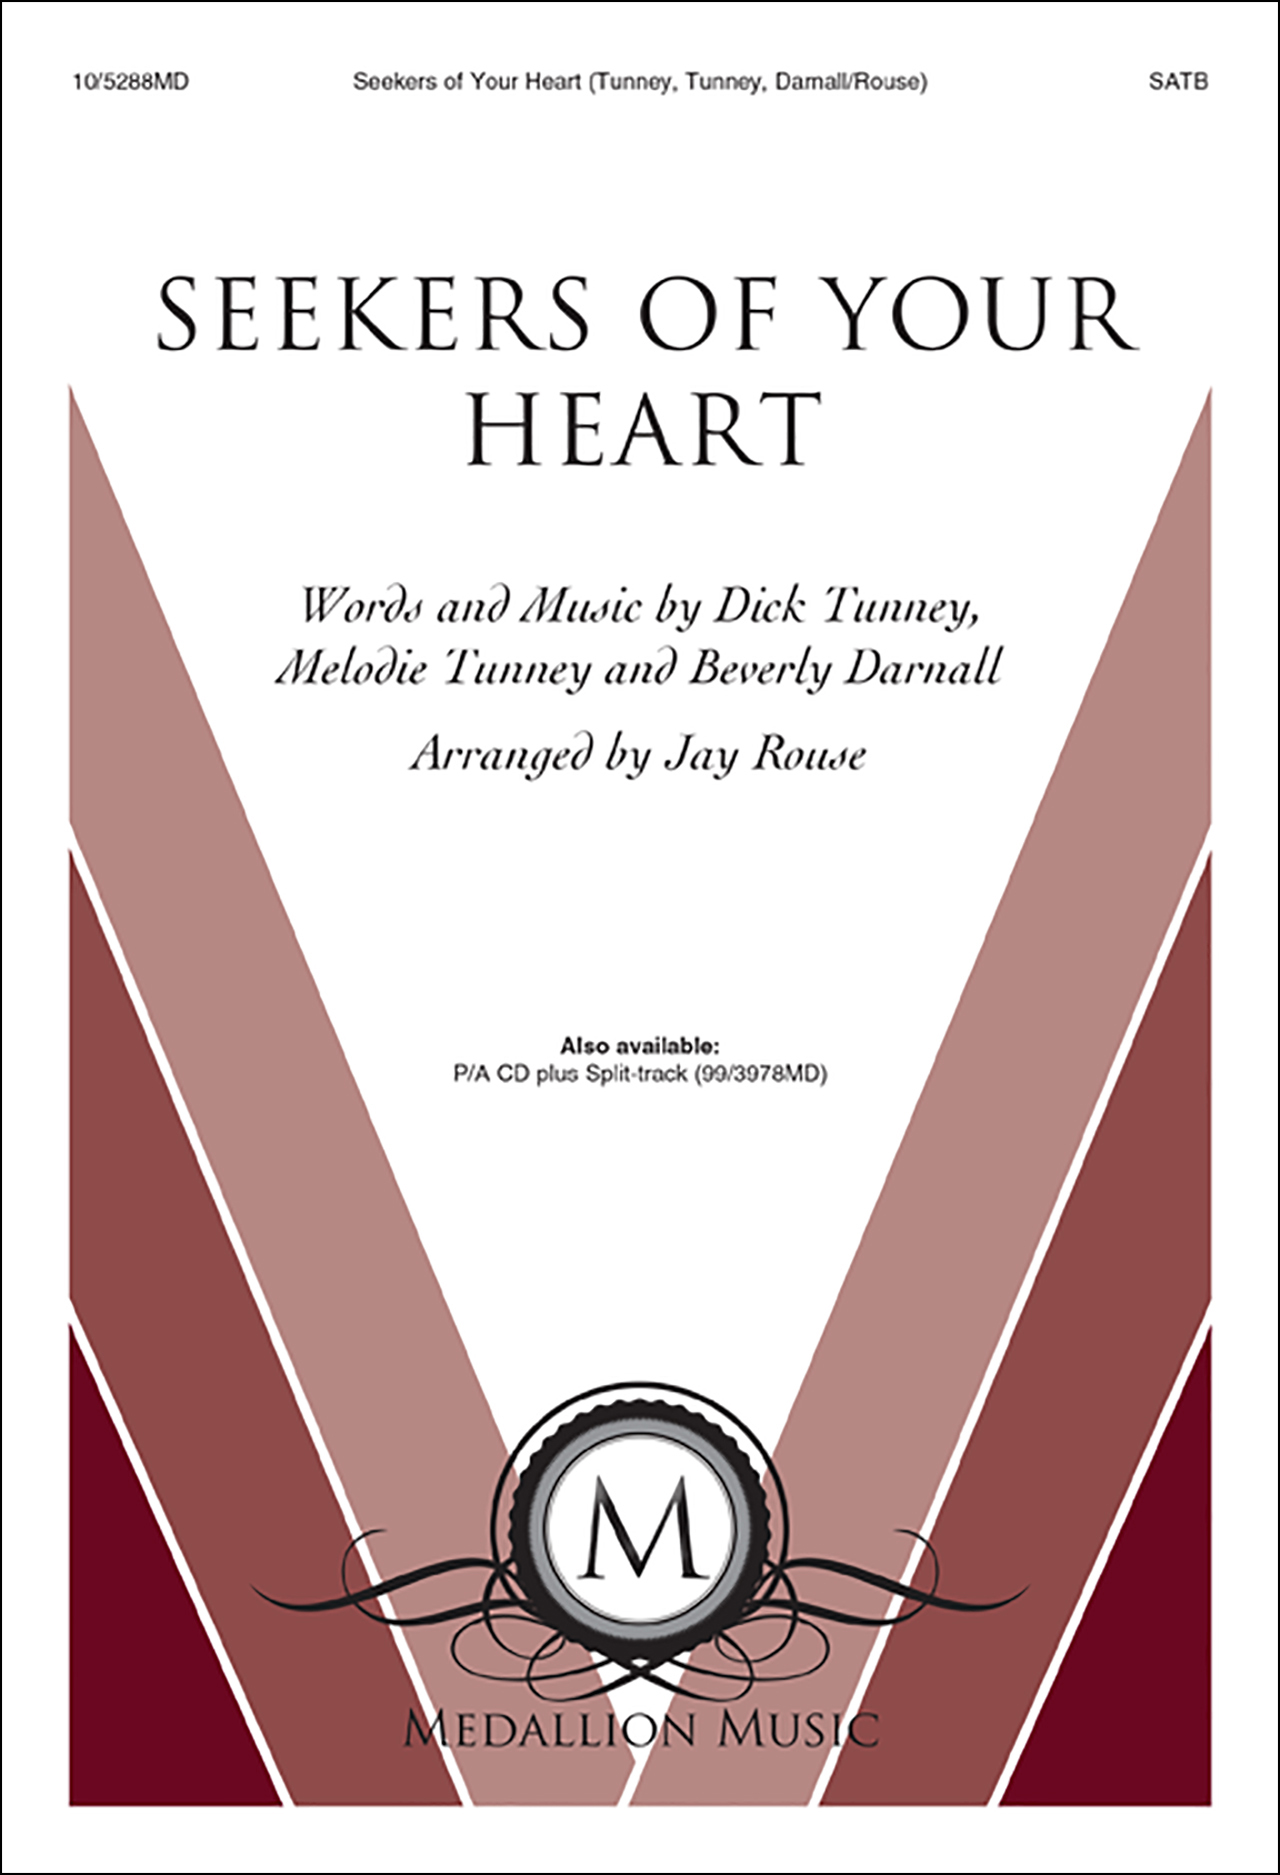 Seekers of Your Heart